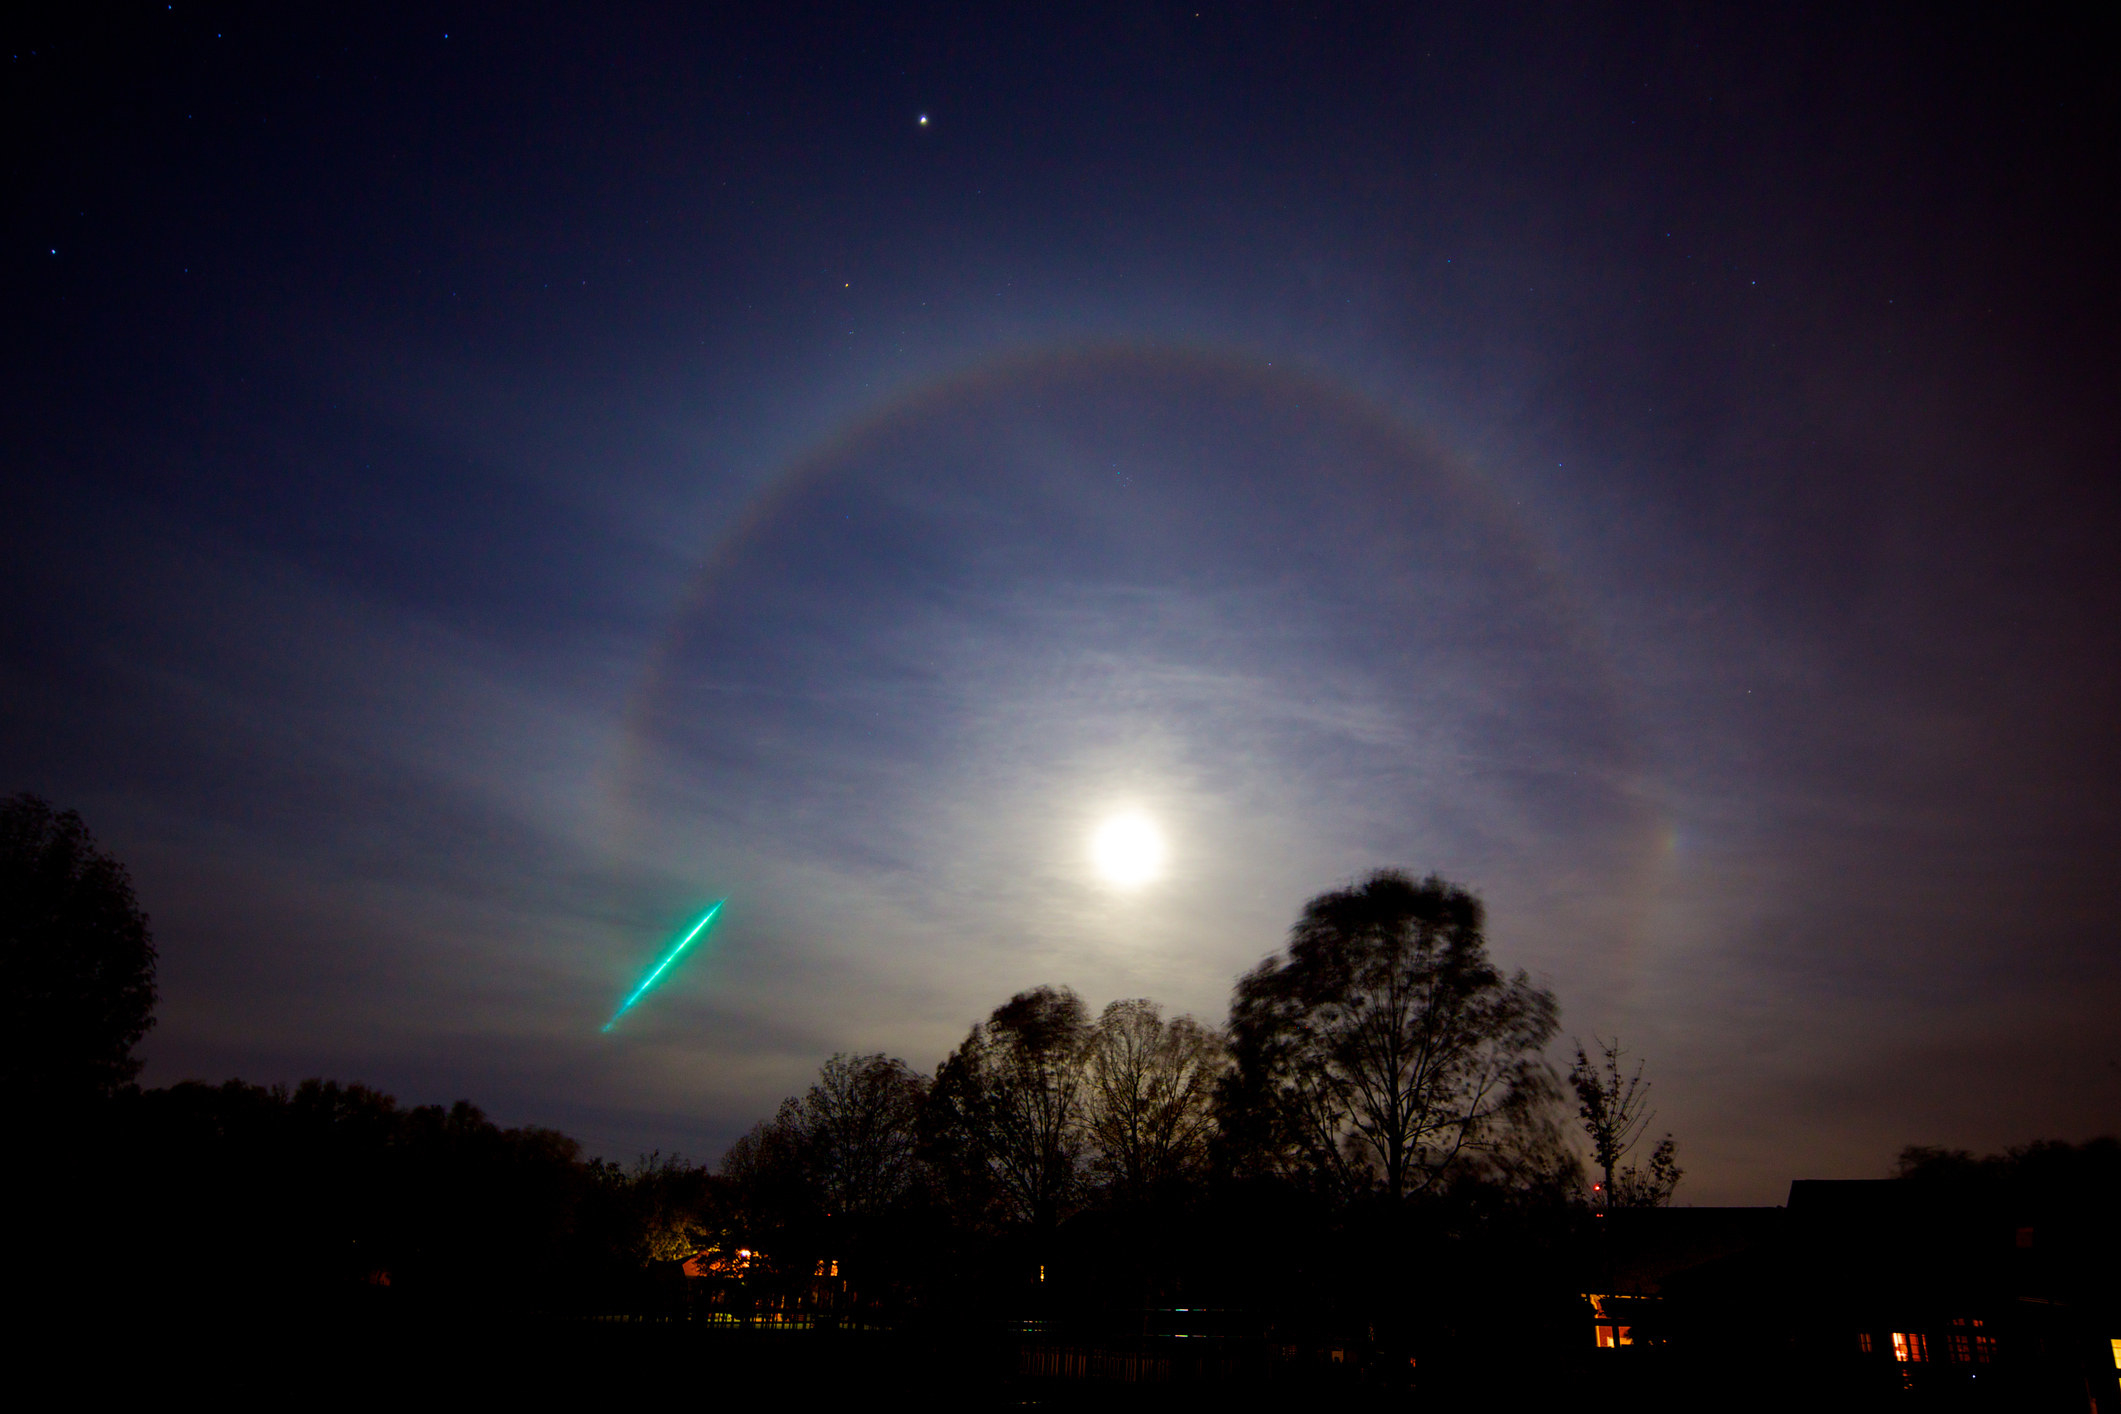 A circle of light around the moon and a meteor.